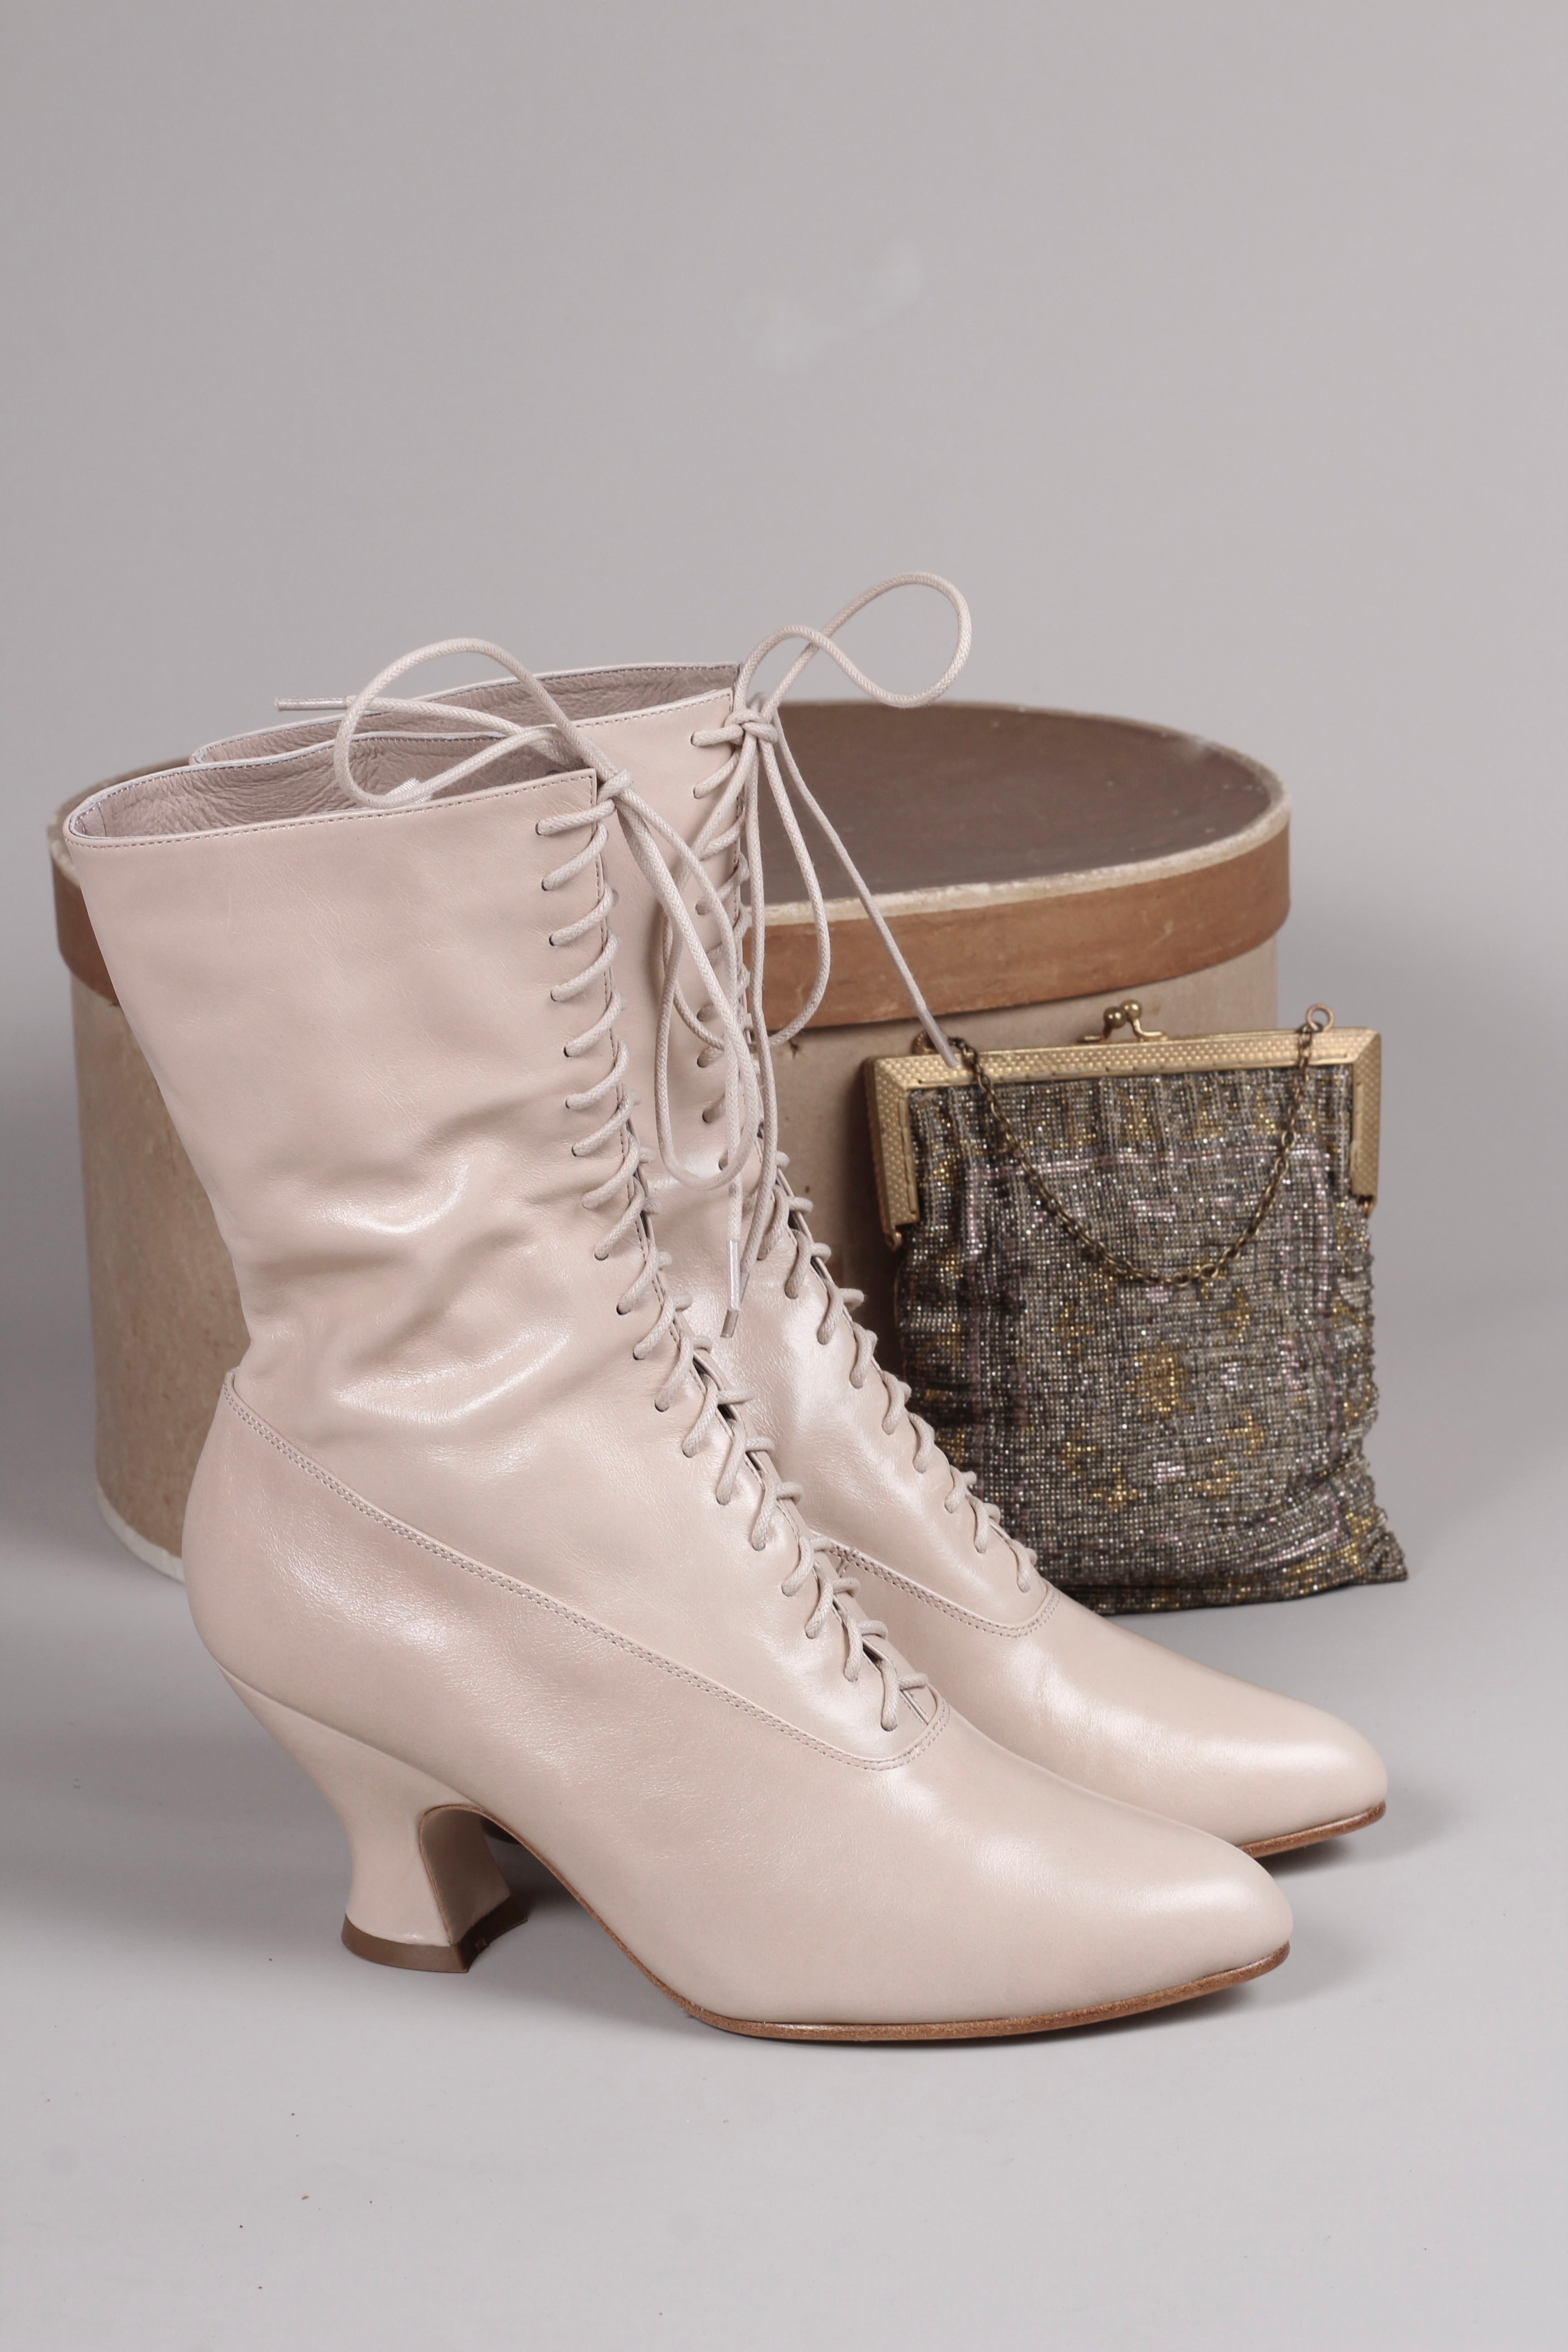 Glove booties leather lace up boots Celine White size 38 EU in Leather -  40667845